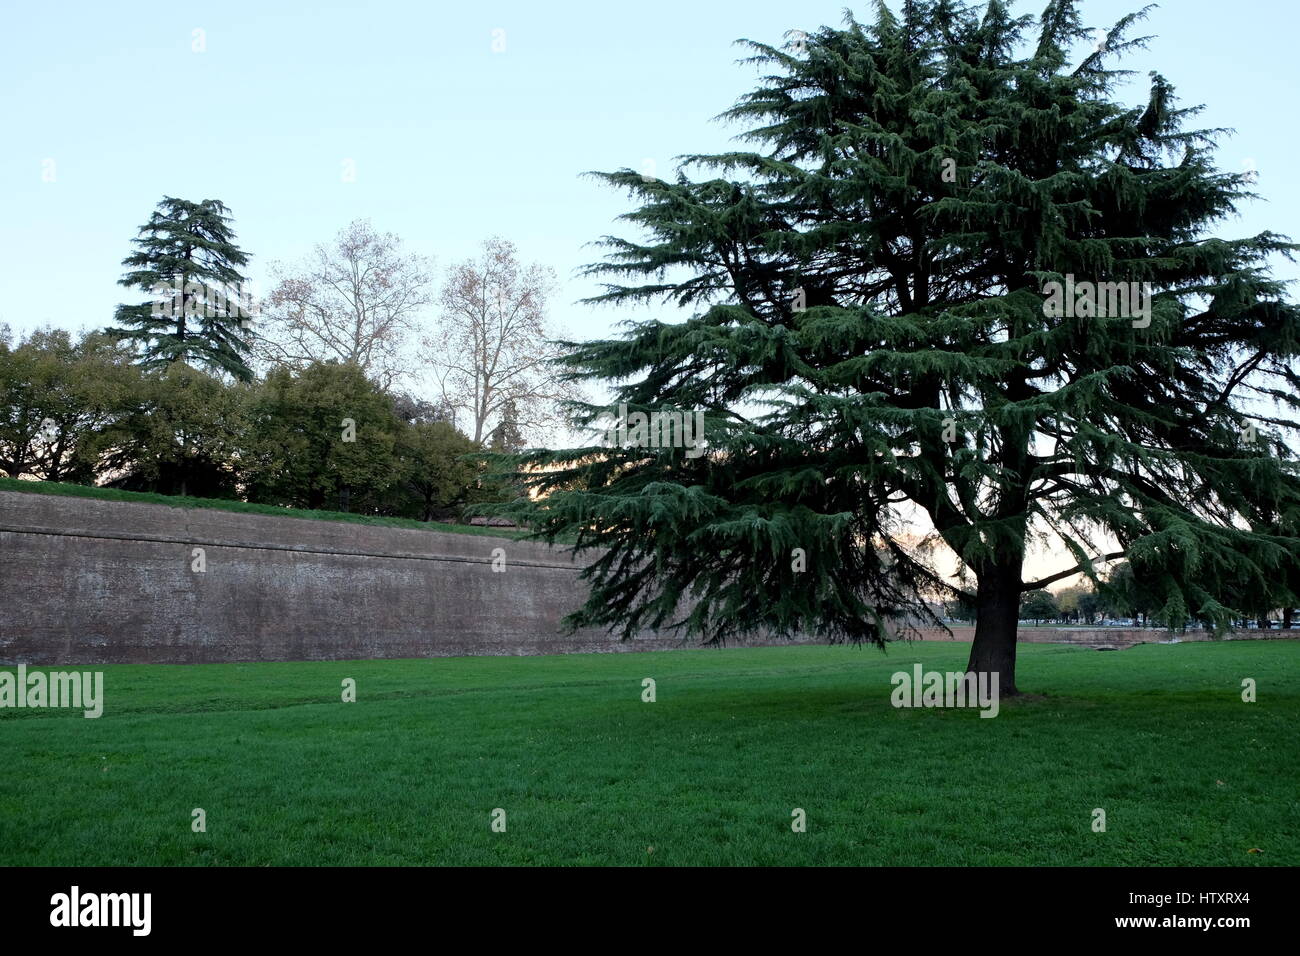 Towering Cedar of Lebanon (Cedrus libani) outside the intact medieval walls of Lucca, Tuscany, Italy, Europe - Green manicured lawn and clear sky Stock Photo